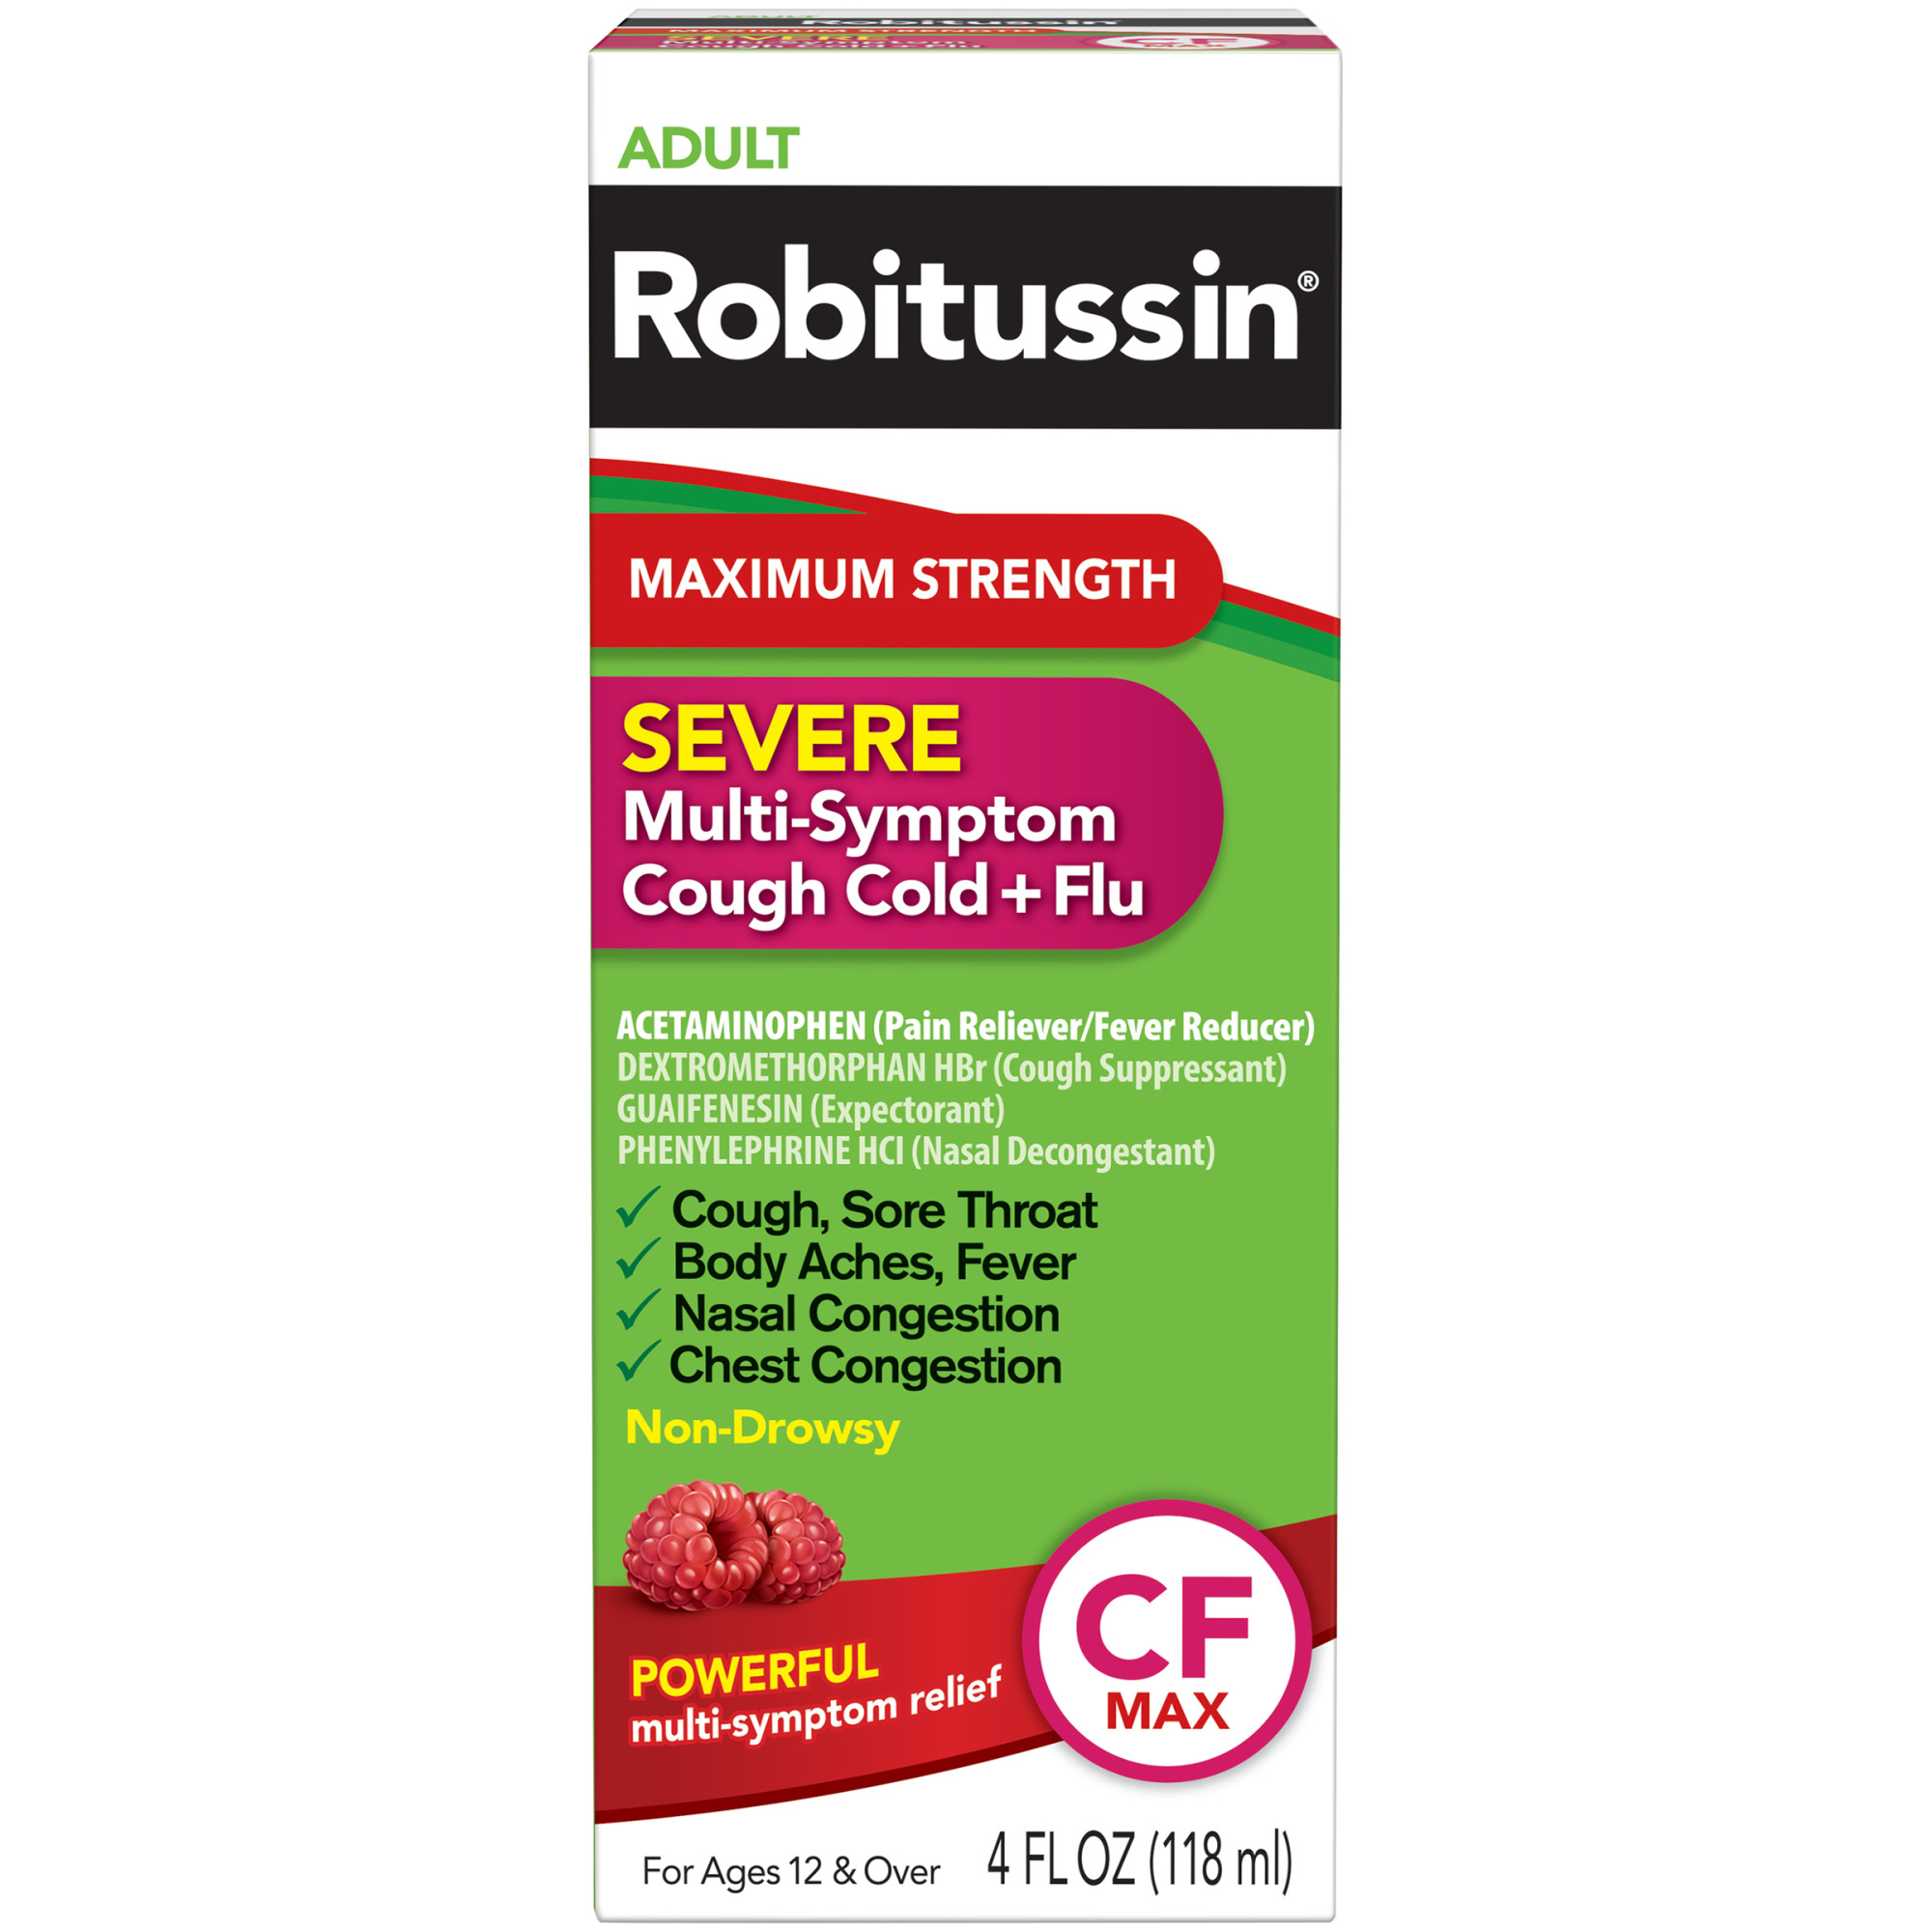 Robitussin CF Max Syrup, Severe Multi-Symptom Relief from Cough, Cold, and Flu - Adult Formula, 4 fl oz. - image 1 of 10